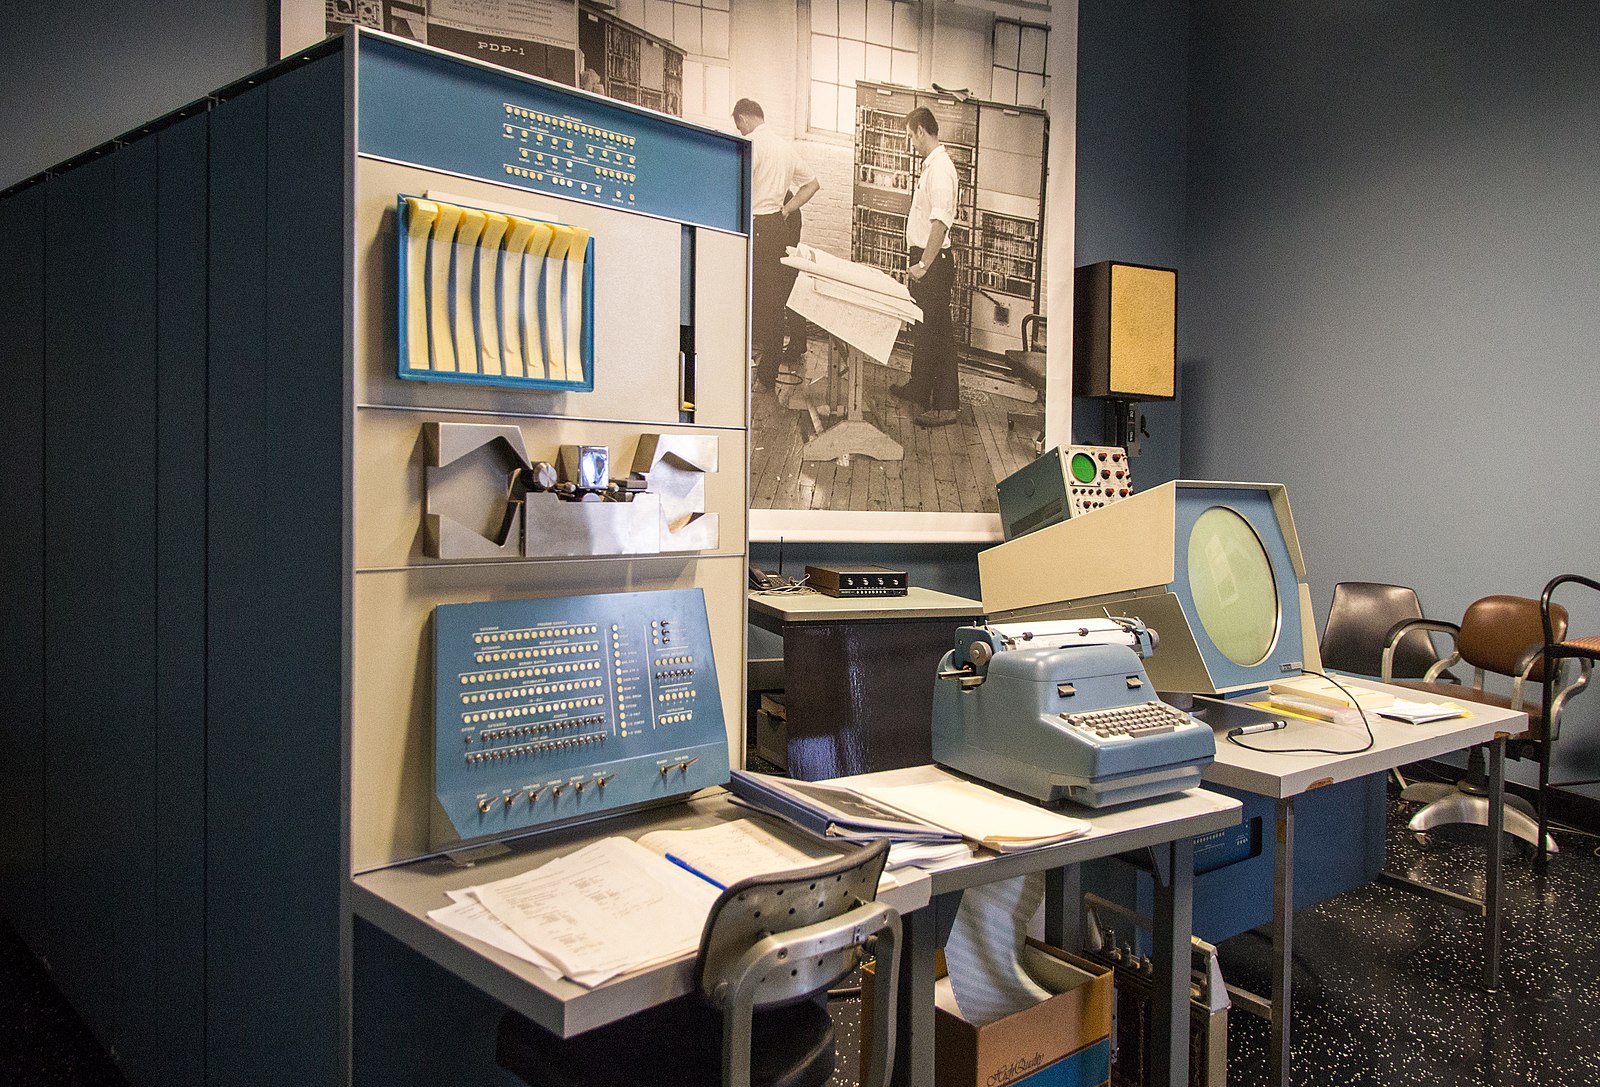 PDP-1 in a computer history museum